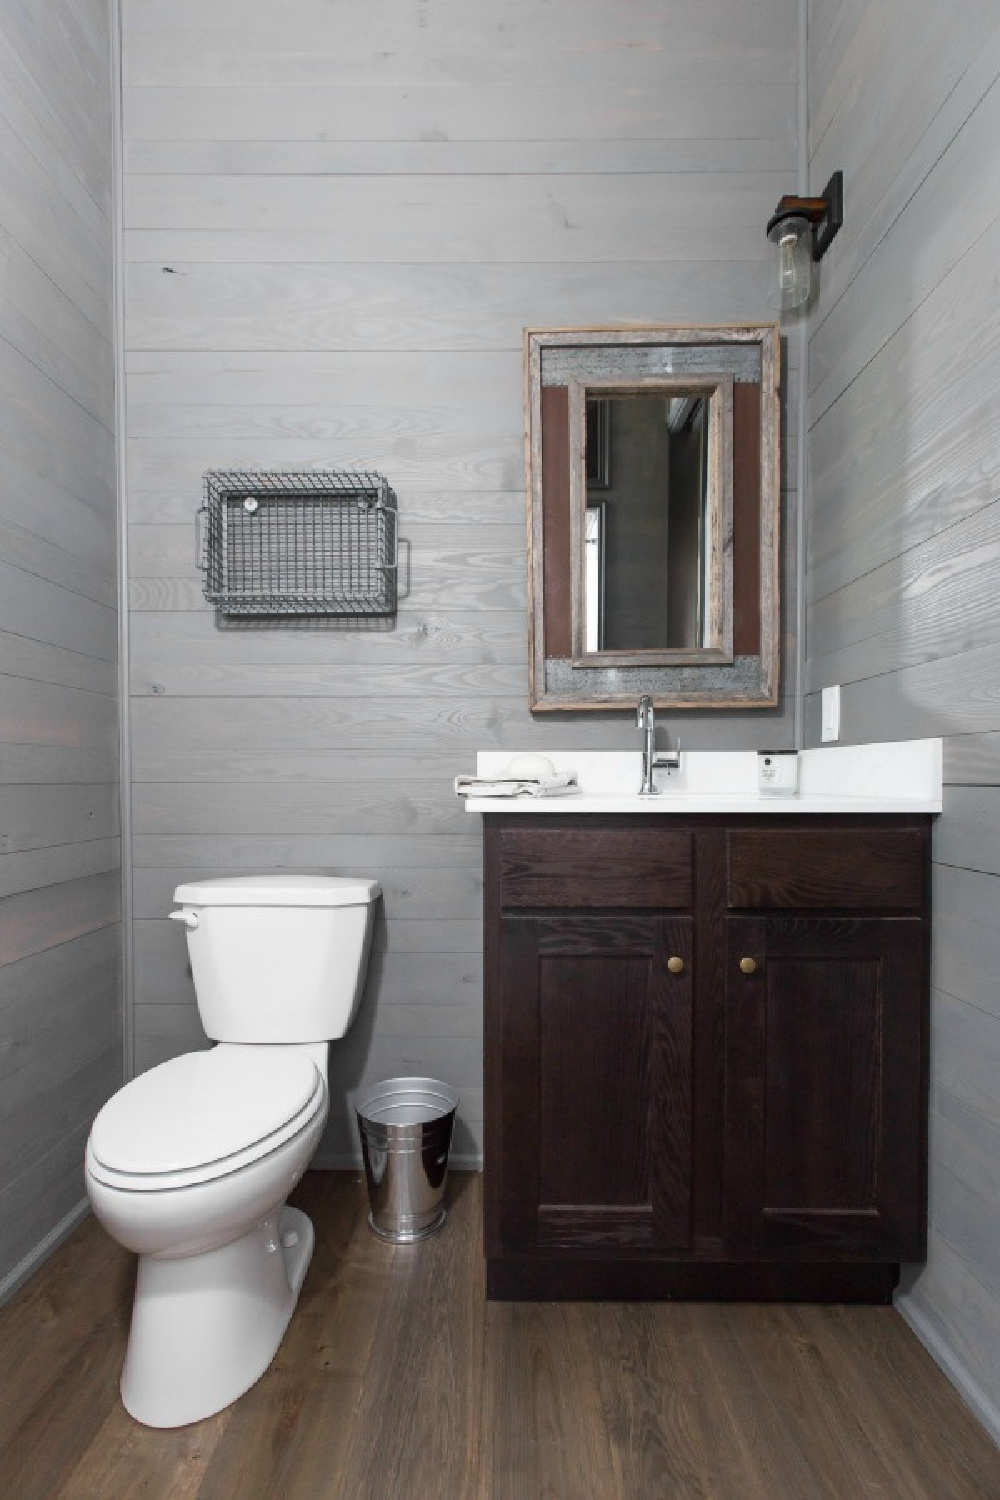 Bathroom in Jeffrey Dungan designed tiny house with finely crafted Low Country style -one of the cottages at The Retreat at Oakstone in Tennessee. #tinyhousedesign